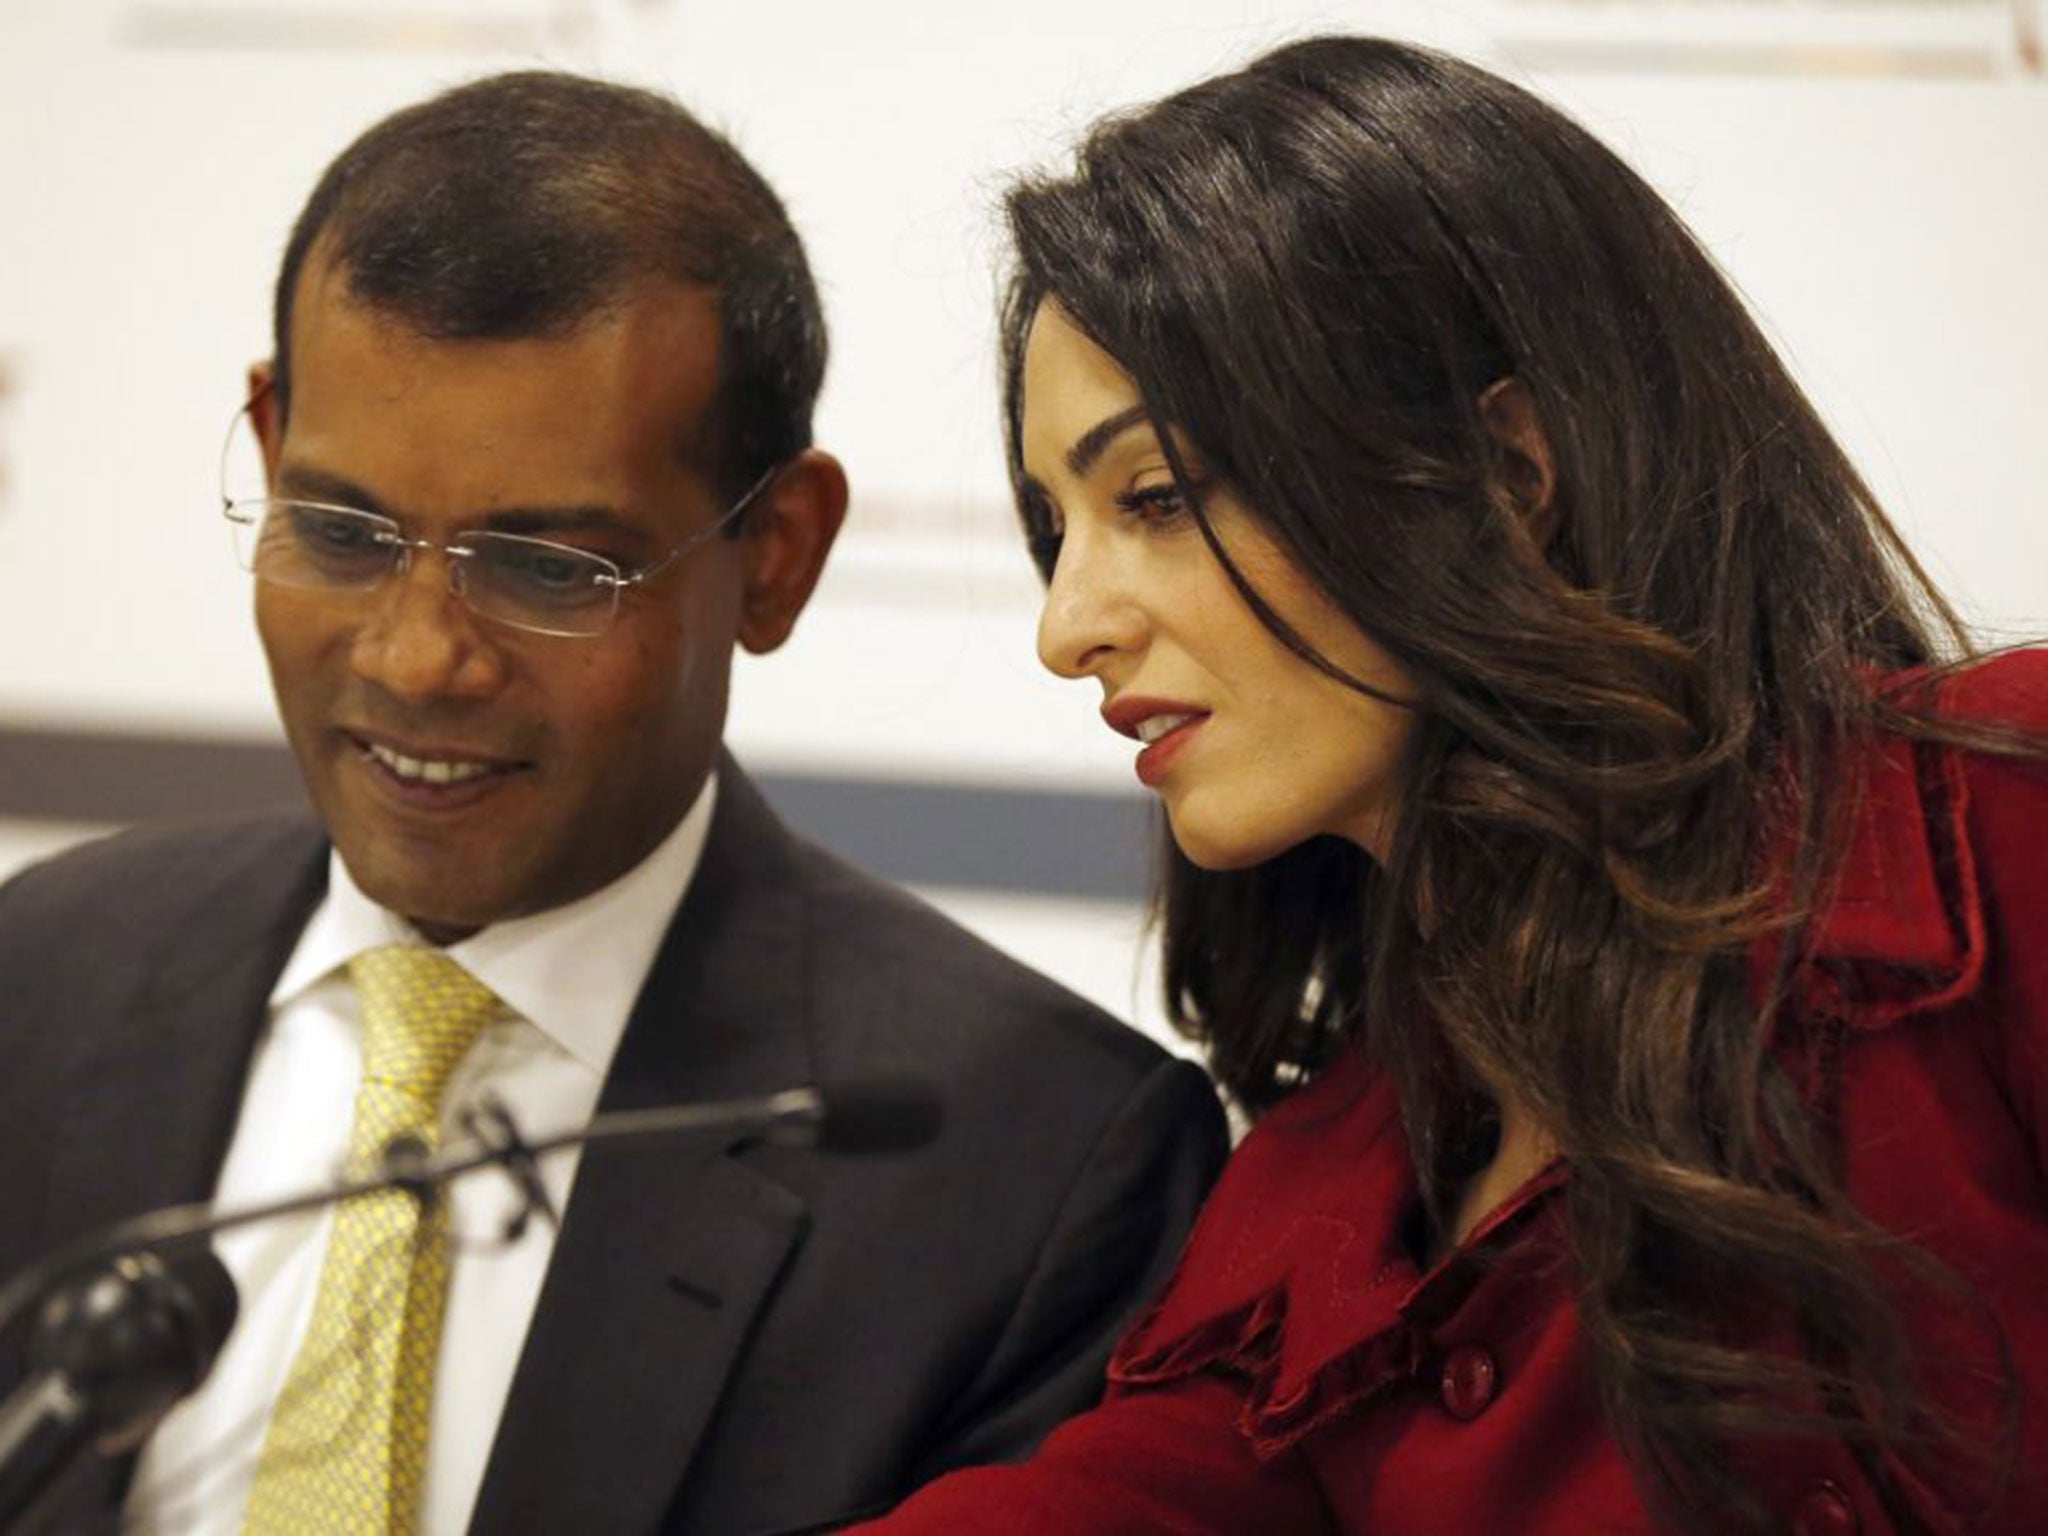 Mohamed Nasheed, the jailed former President of the Maldives, pictured with his lawyer Amal Clooney, vows to return to fight for democracy